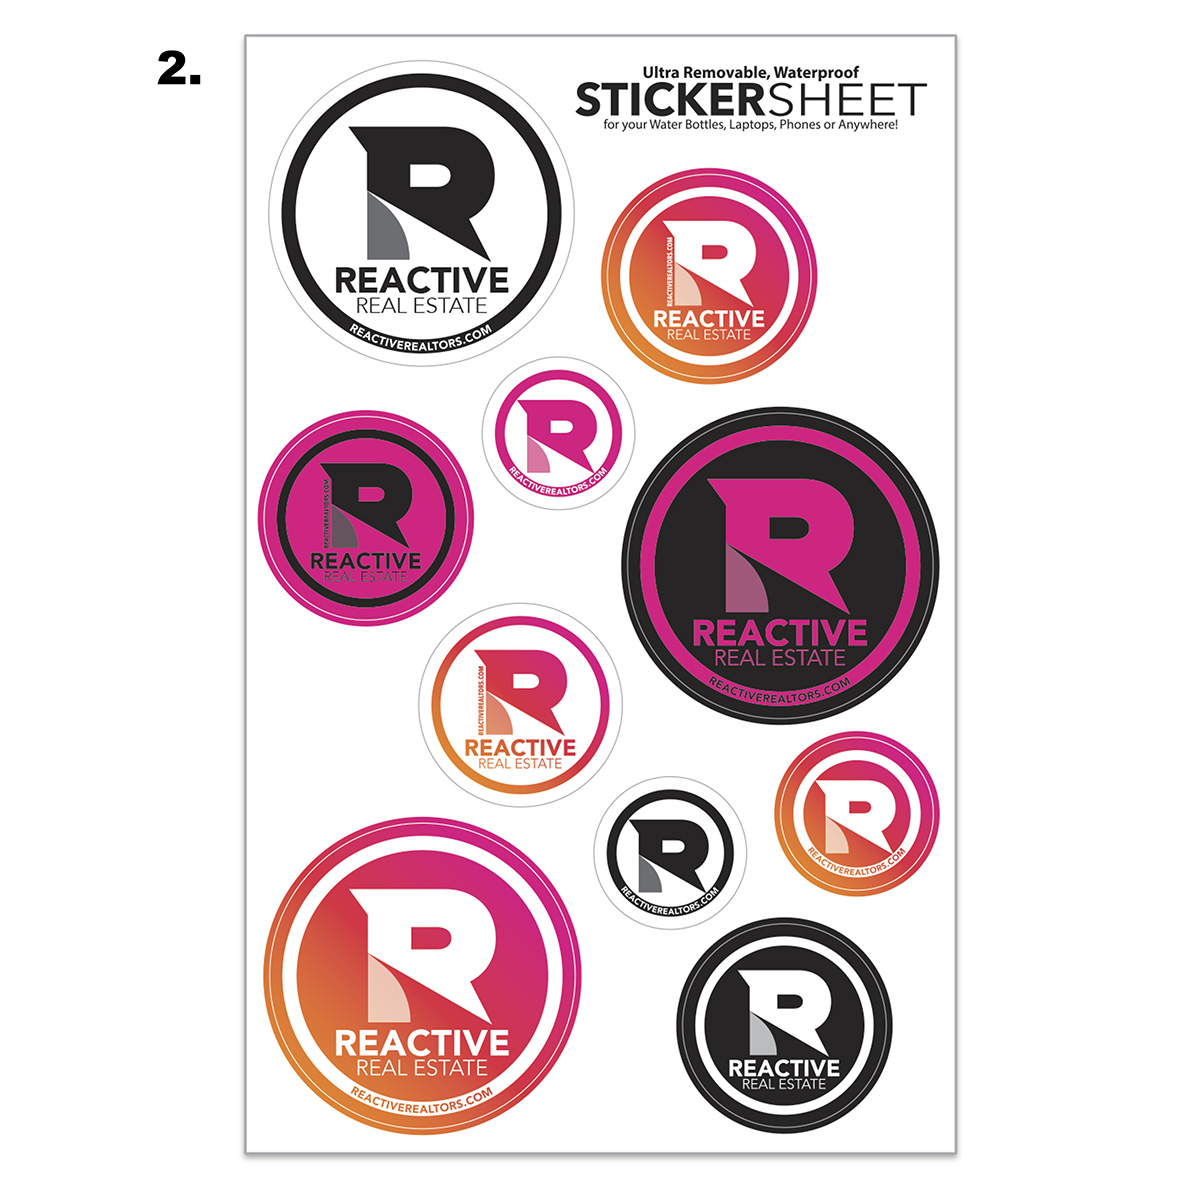 Decal Sticker Sheet | USA Made | Full Color | 7" x 11"